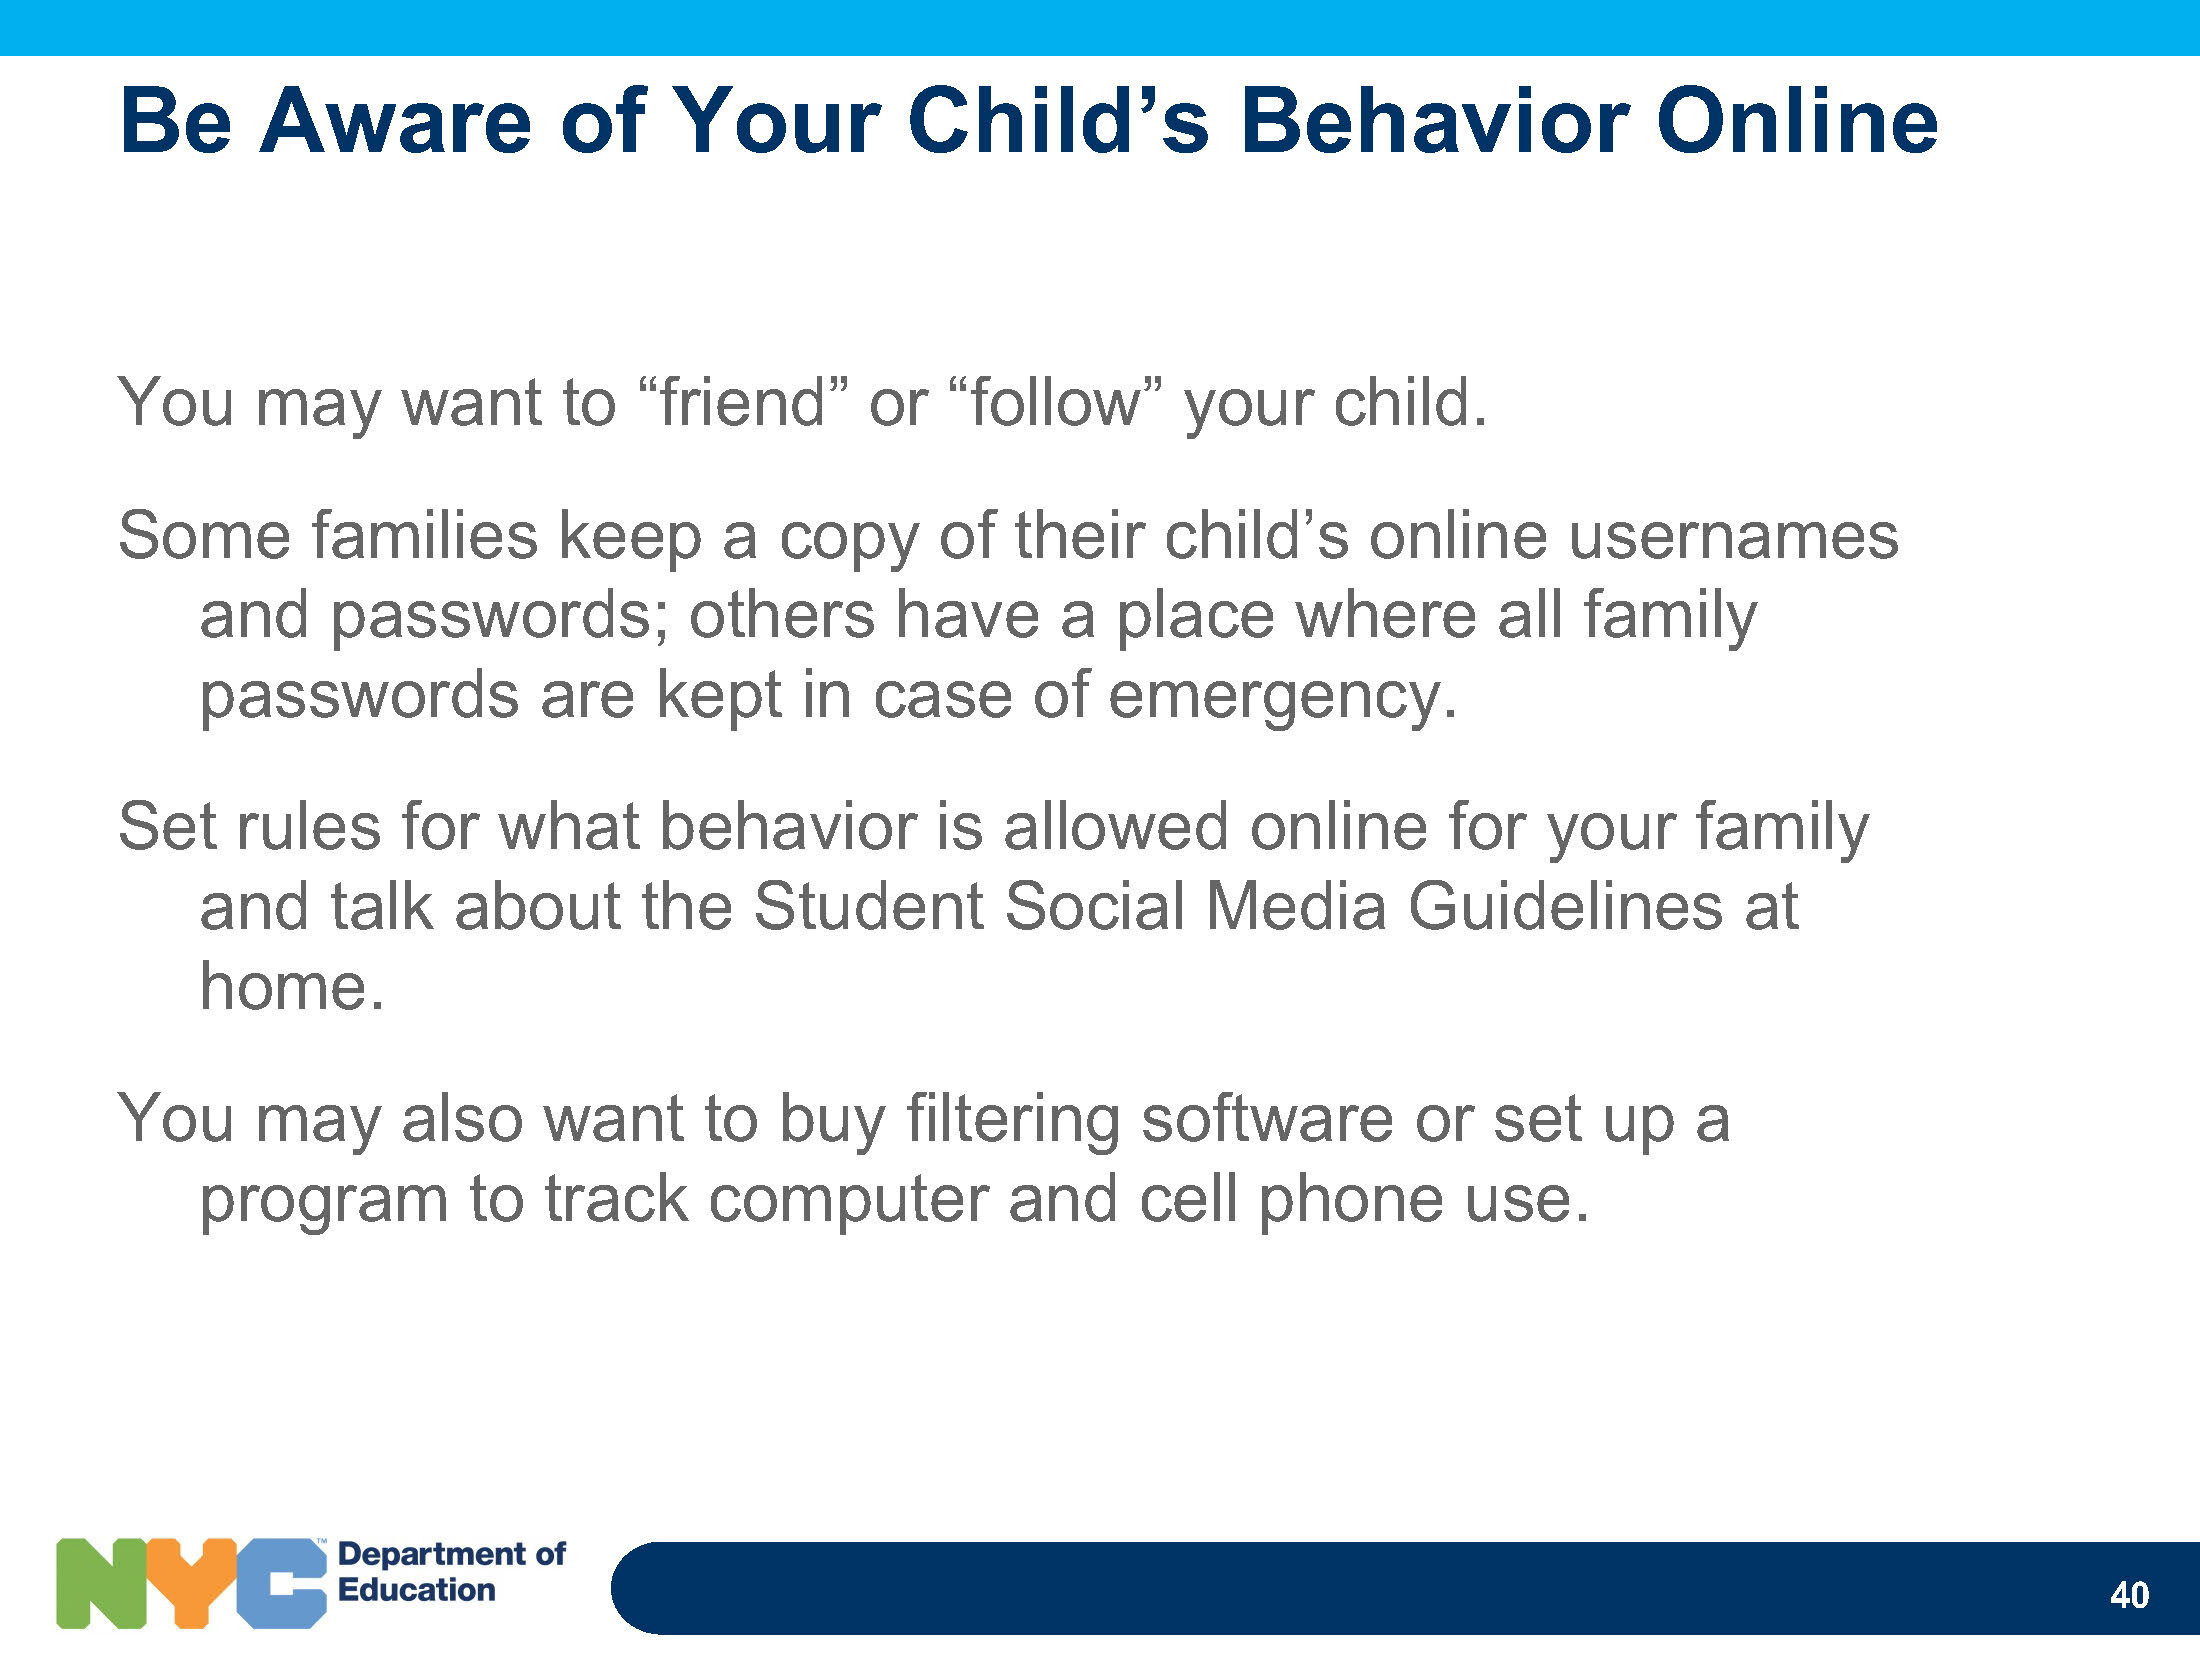 face-bullying-and-cyberbullying-presentation-for-parents_Page_40.jpg